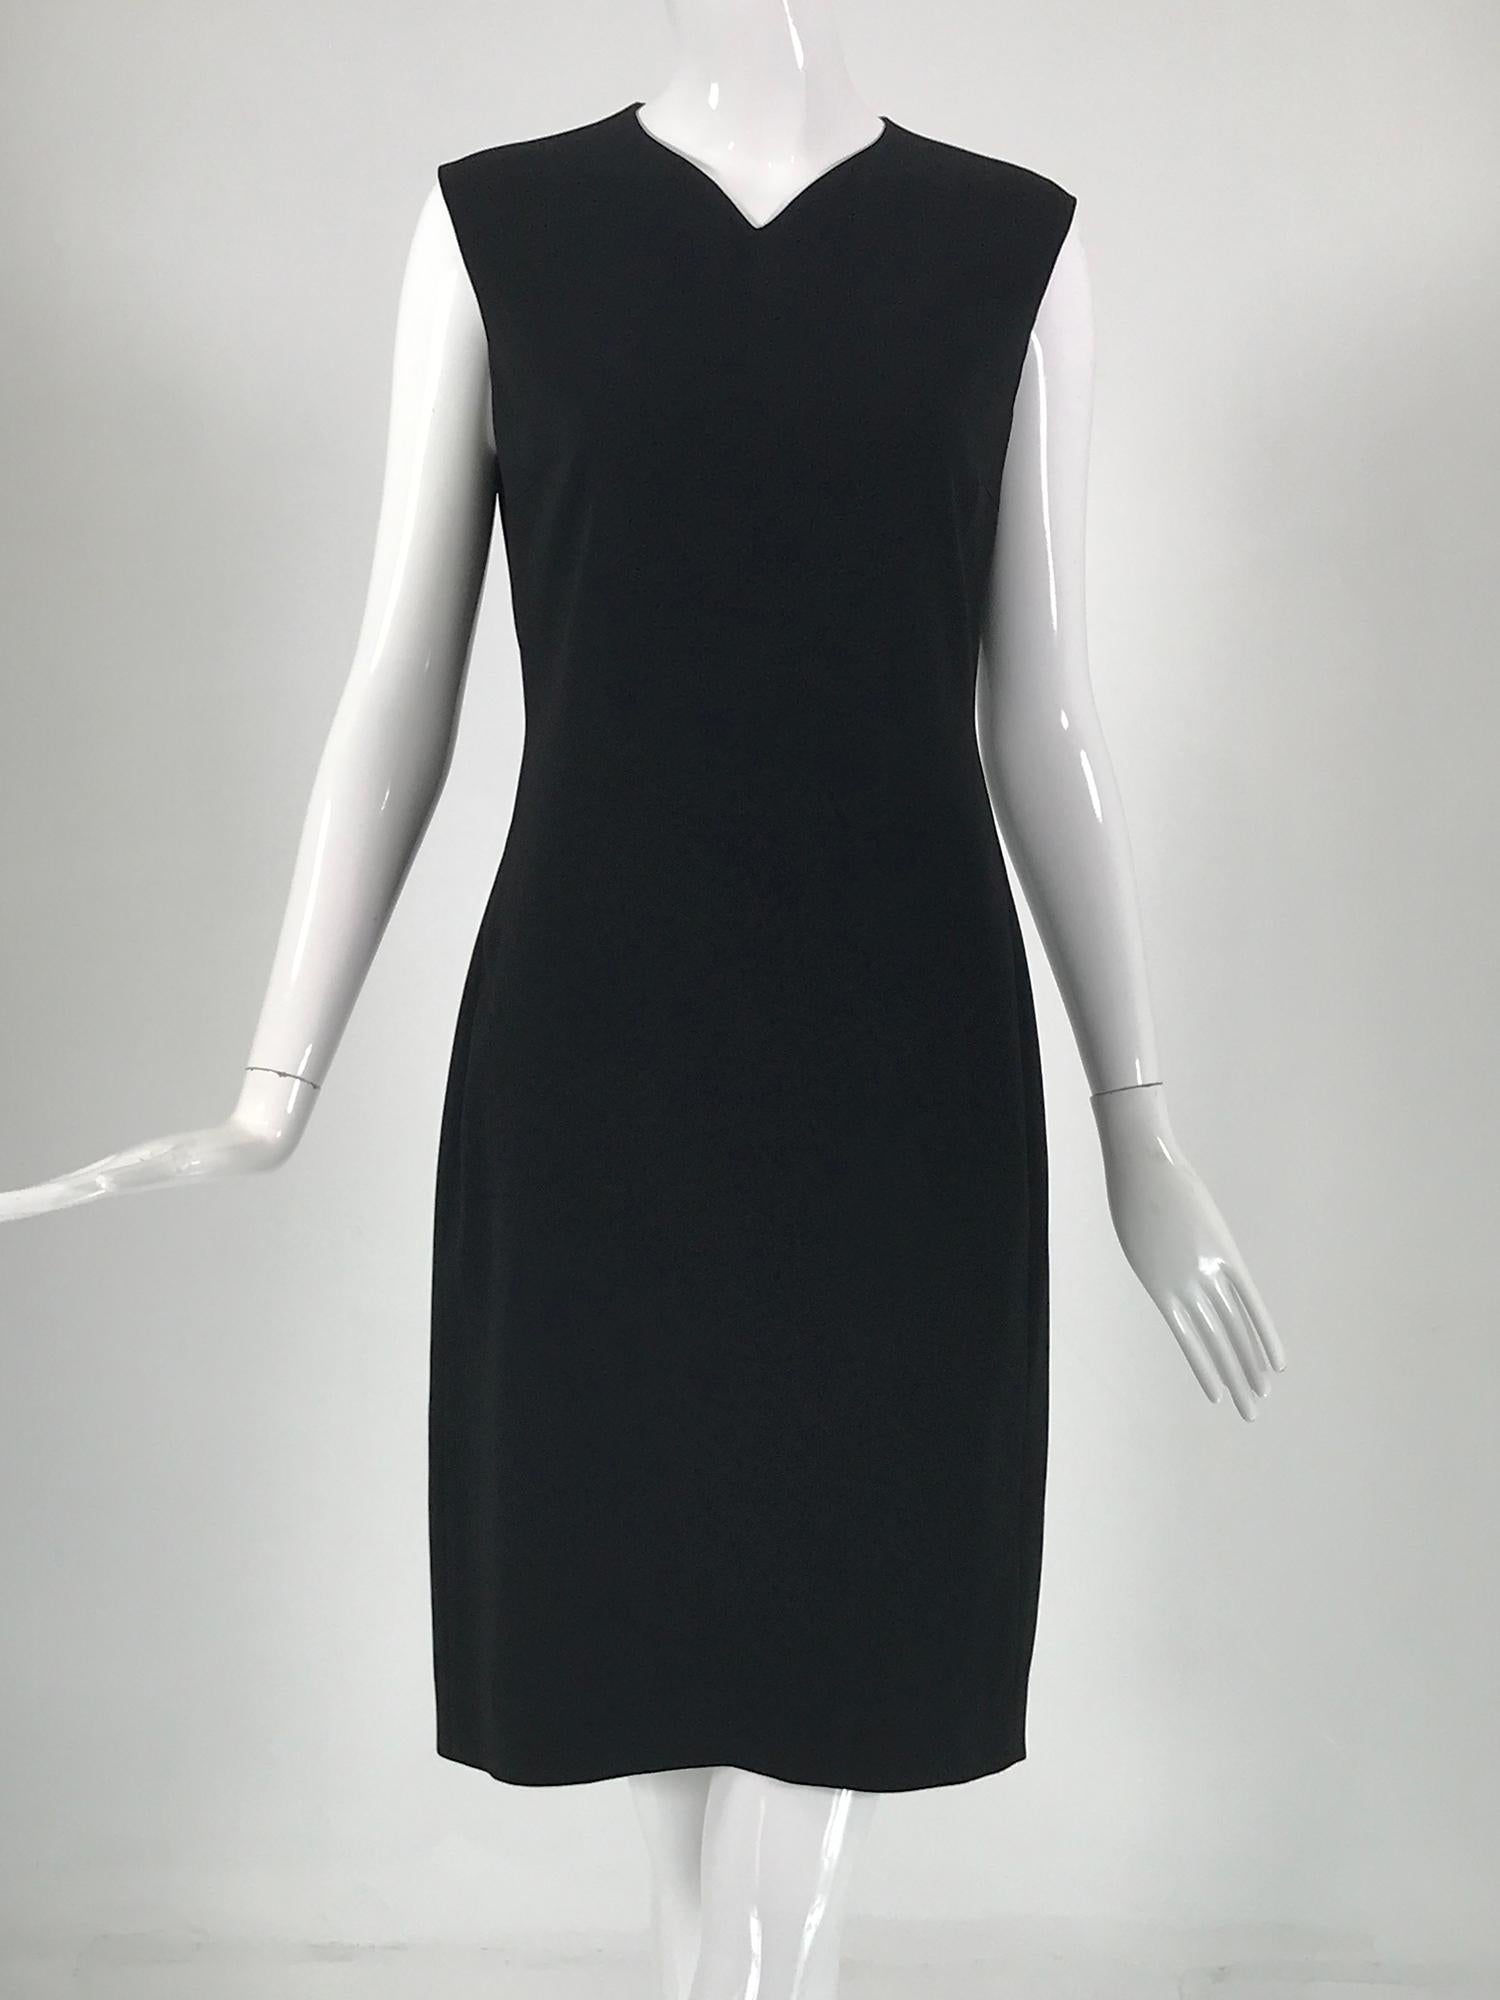 Jil Sander black crepe sleeveless sheath dress with peek a boo back. V neck dress, with curved waist center back/back side seams to the hem, the seaming accentuates body shape. The upper back has peek a boo vertical openings at each side to the